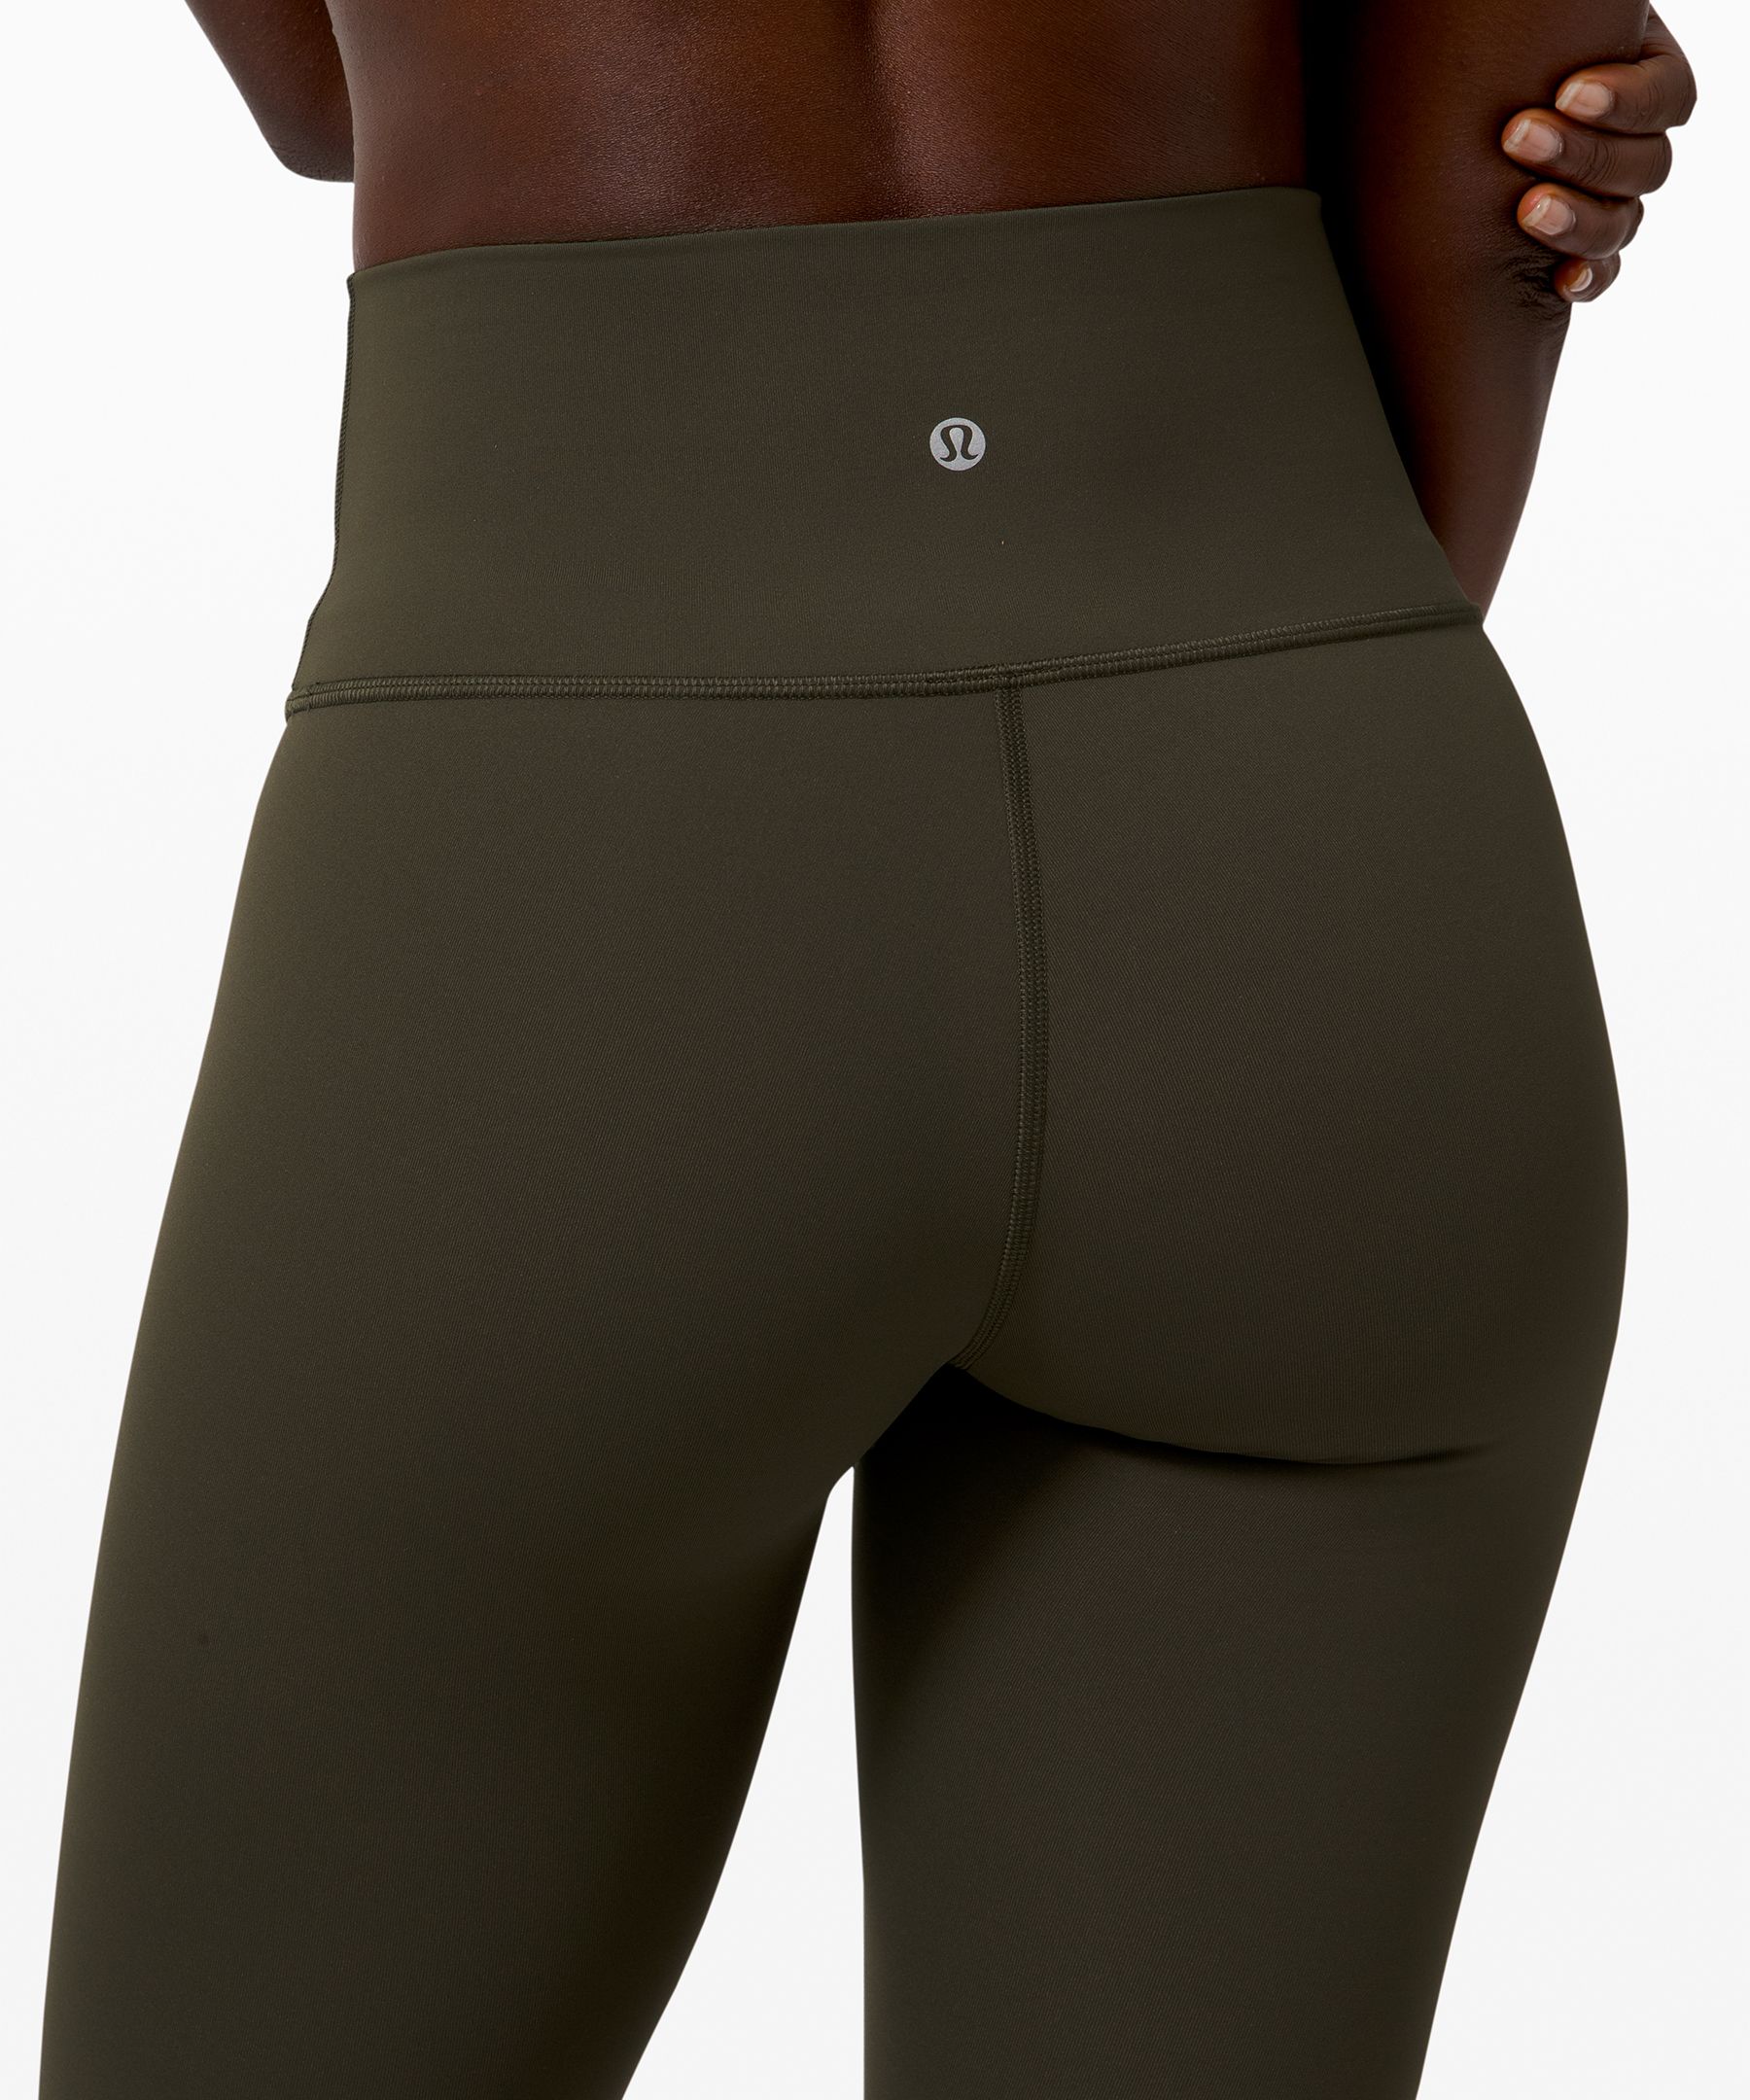 Lululemon Wunder Under Super High-rise Tight *full-on Luxtreme Online Only  28 In Formation Camo Deep Coal Multi